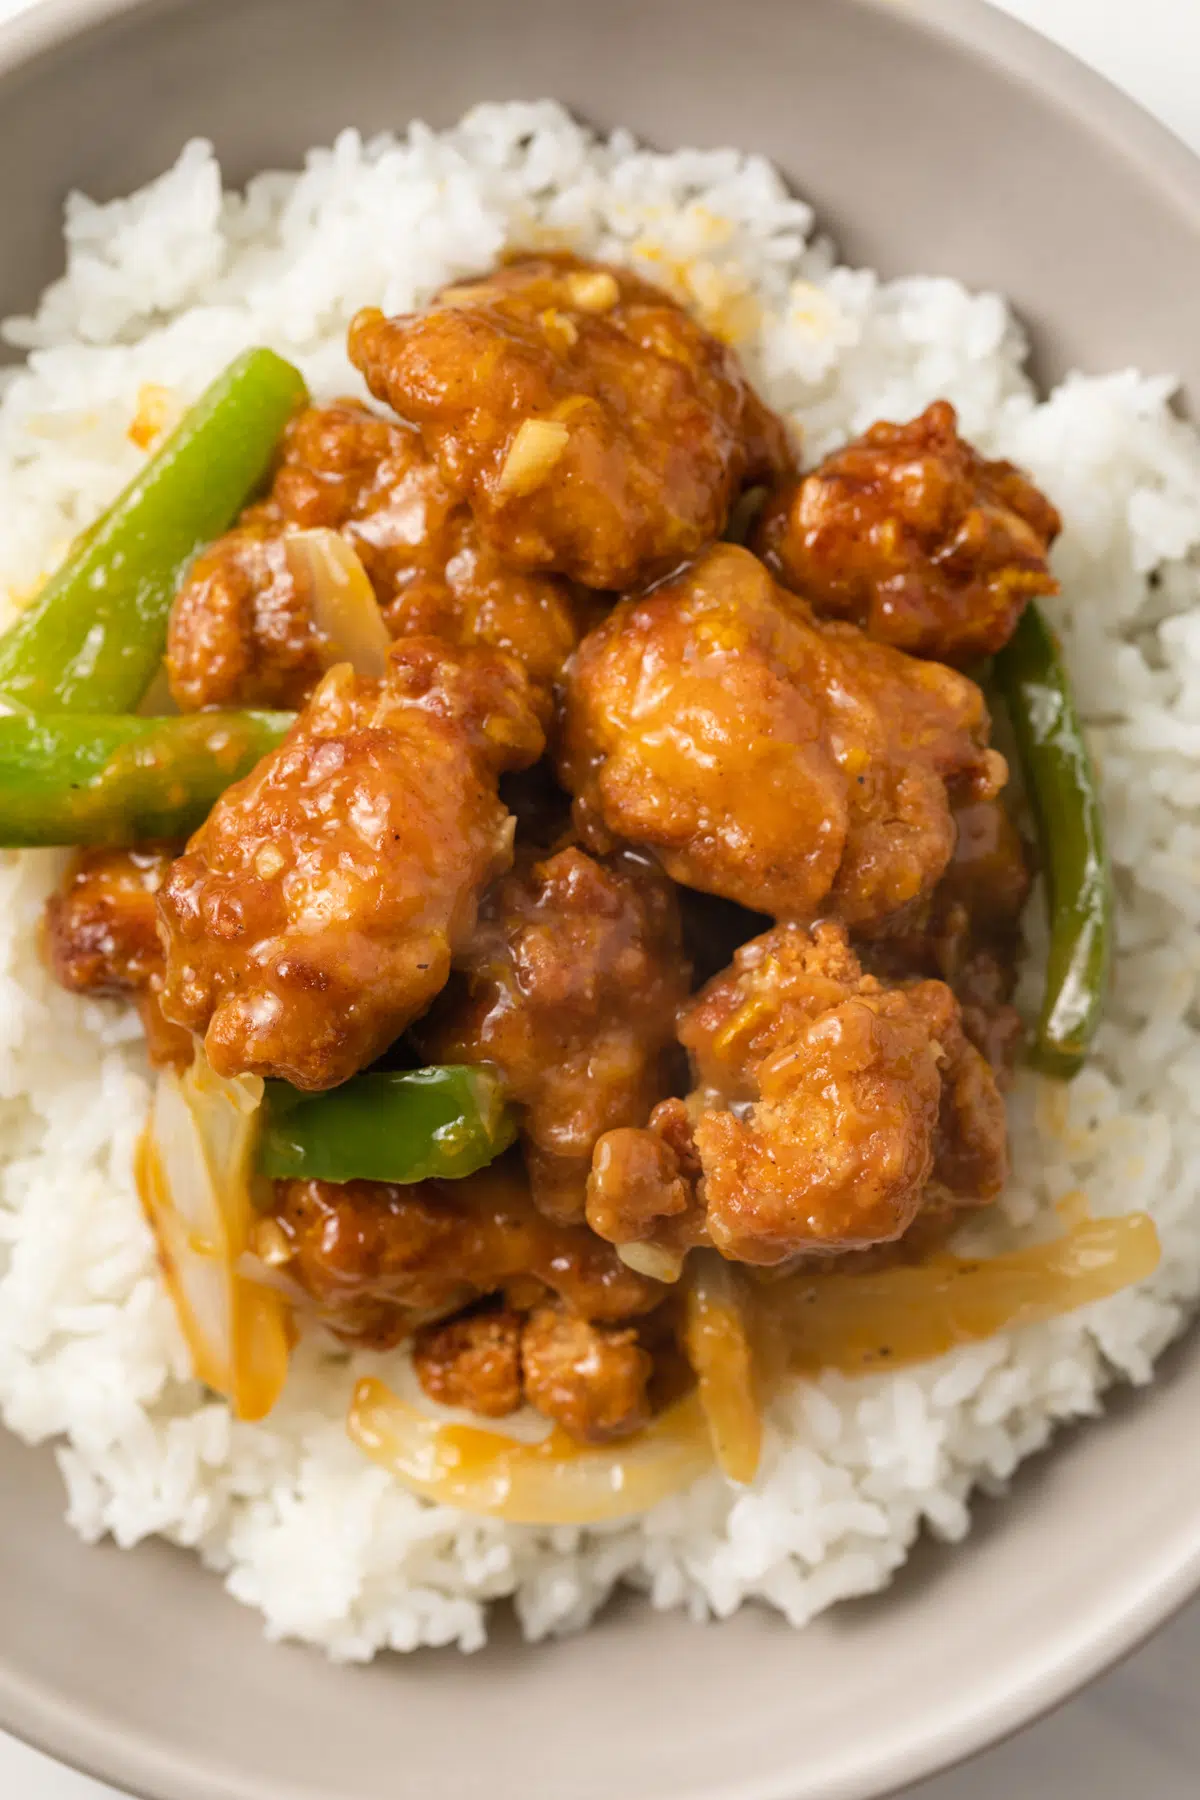 Close up of chicken coated in orange ginger sauce over rice.